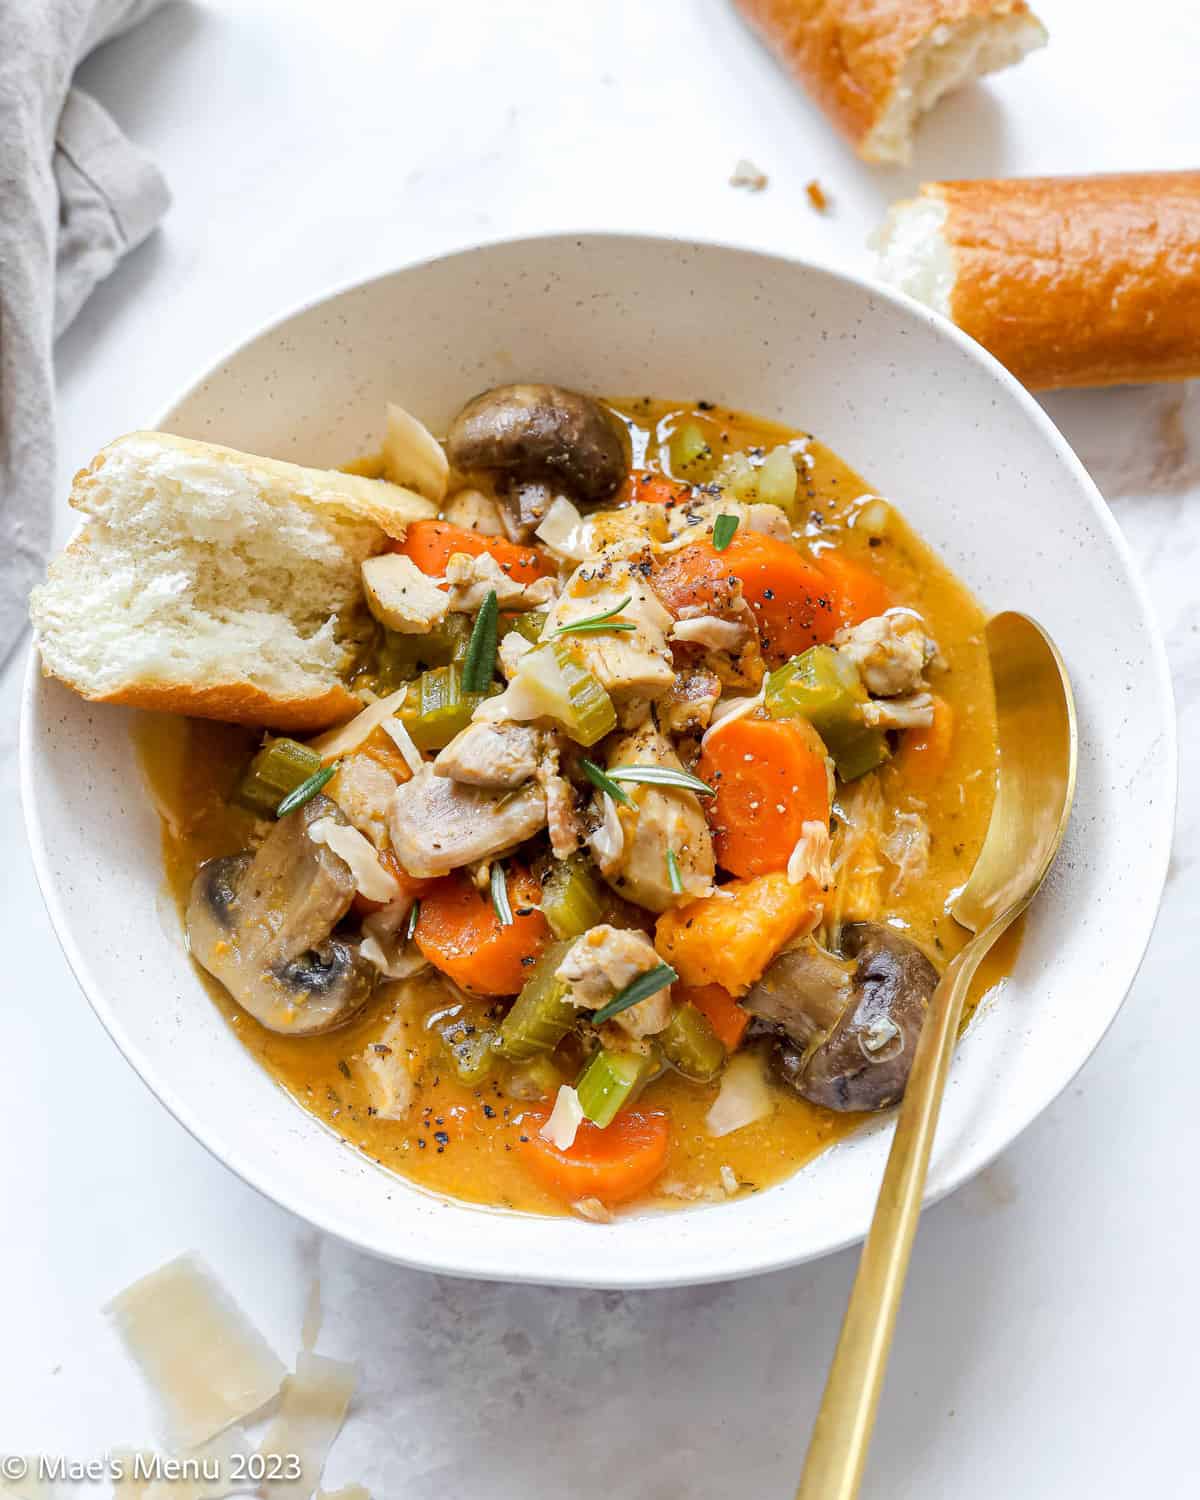 Large white bowl of instant pot chicken stew with bread and a spoon on a countertop.